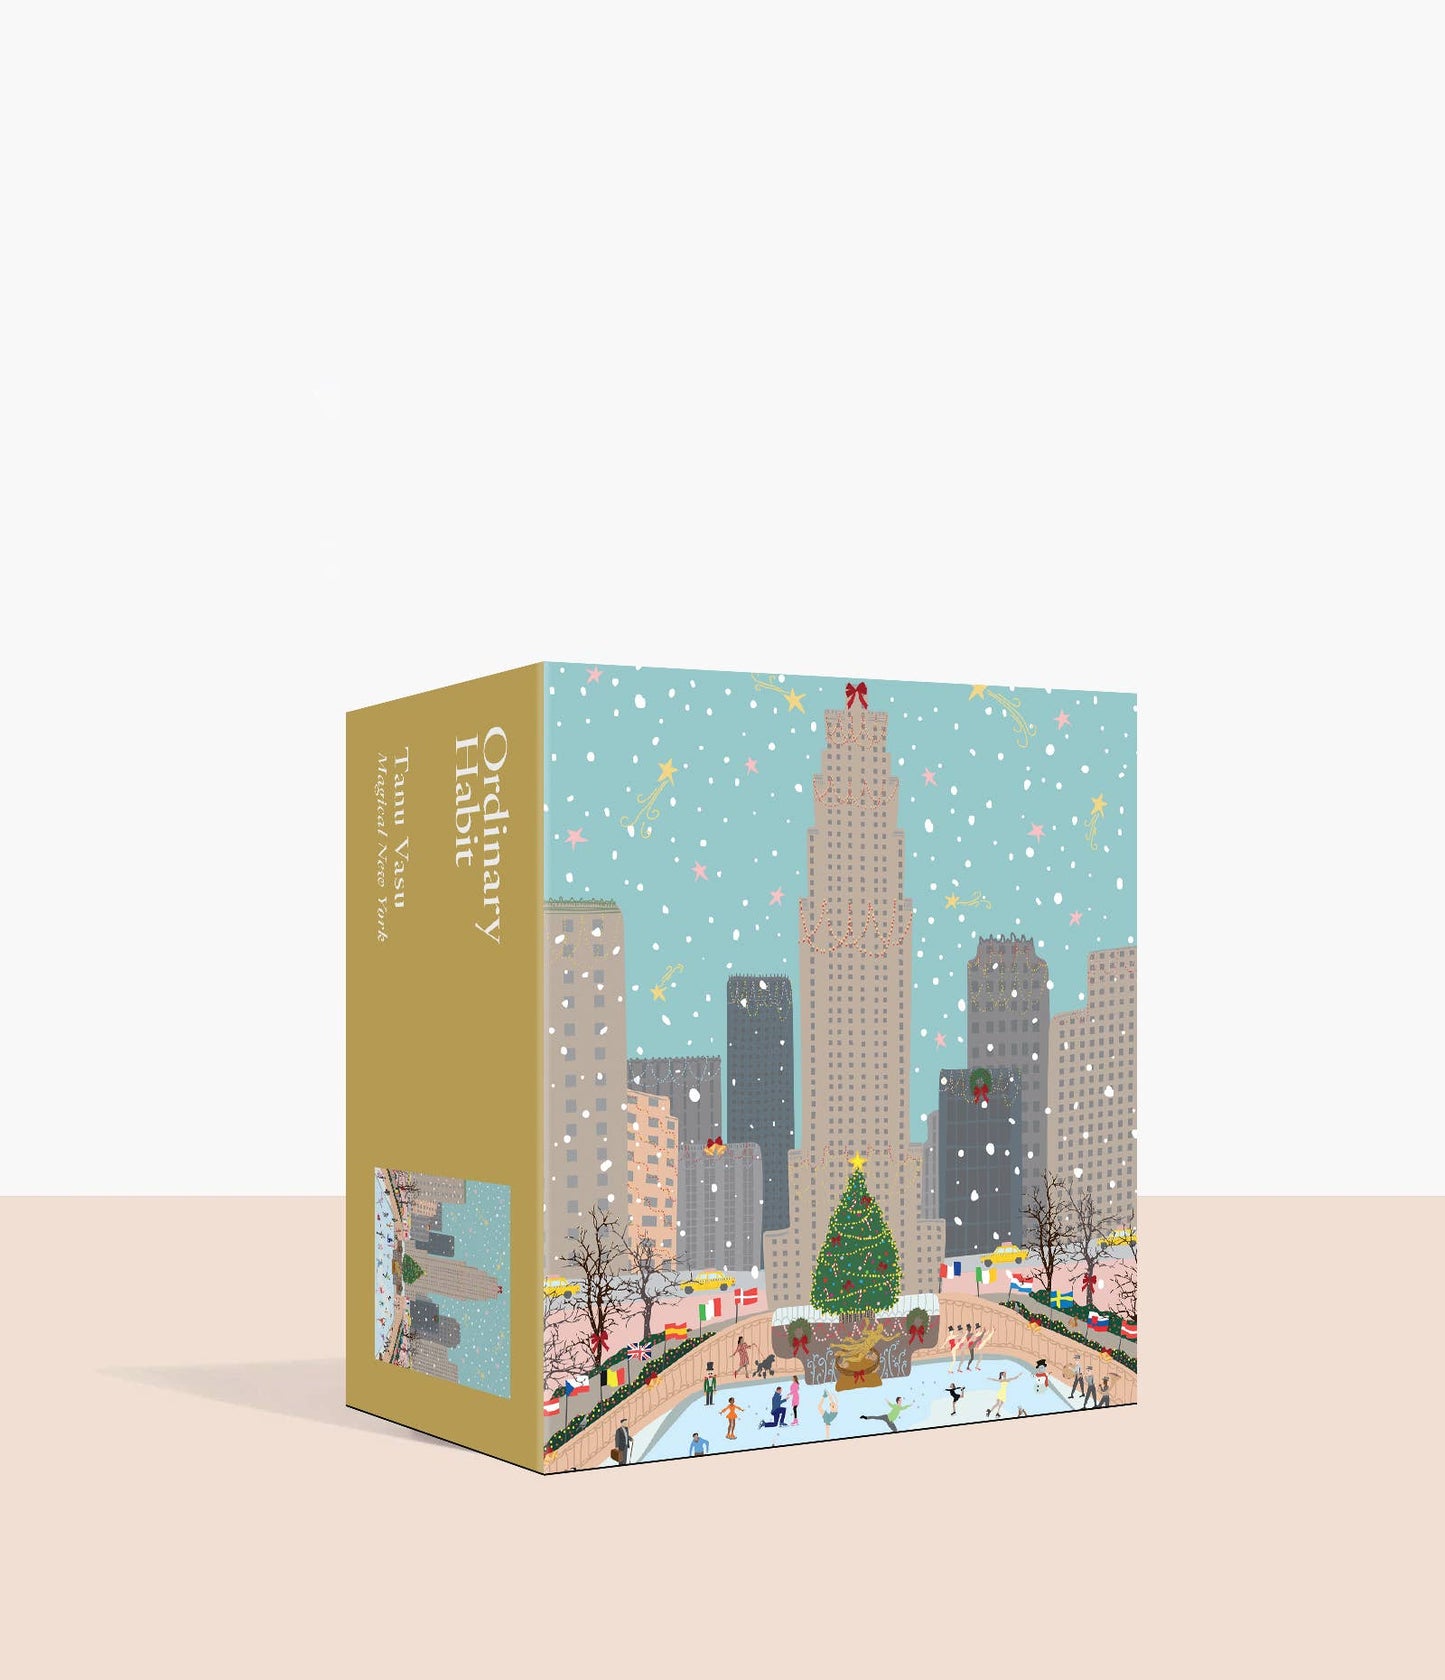 Magical New York - 100 Piece Puzzle